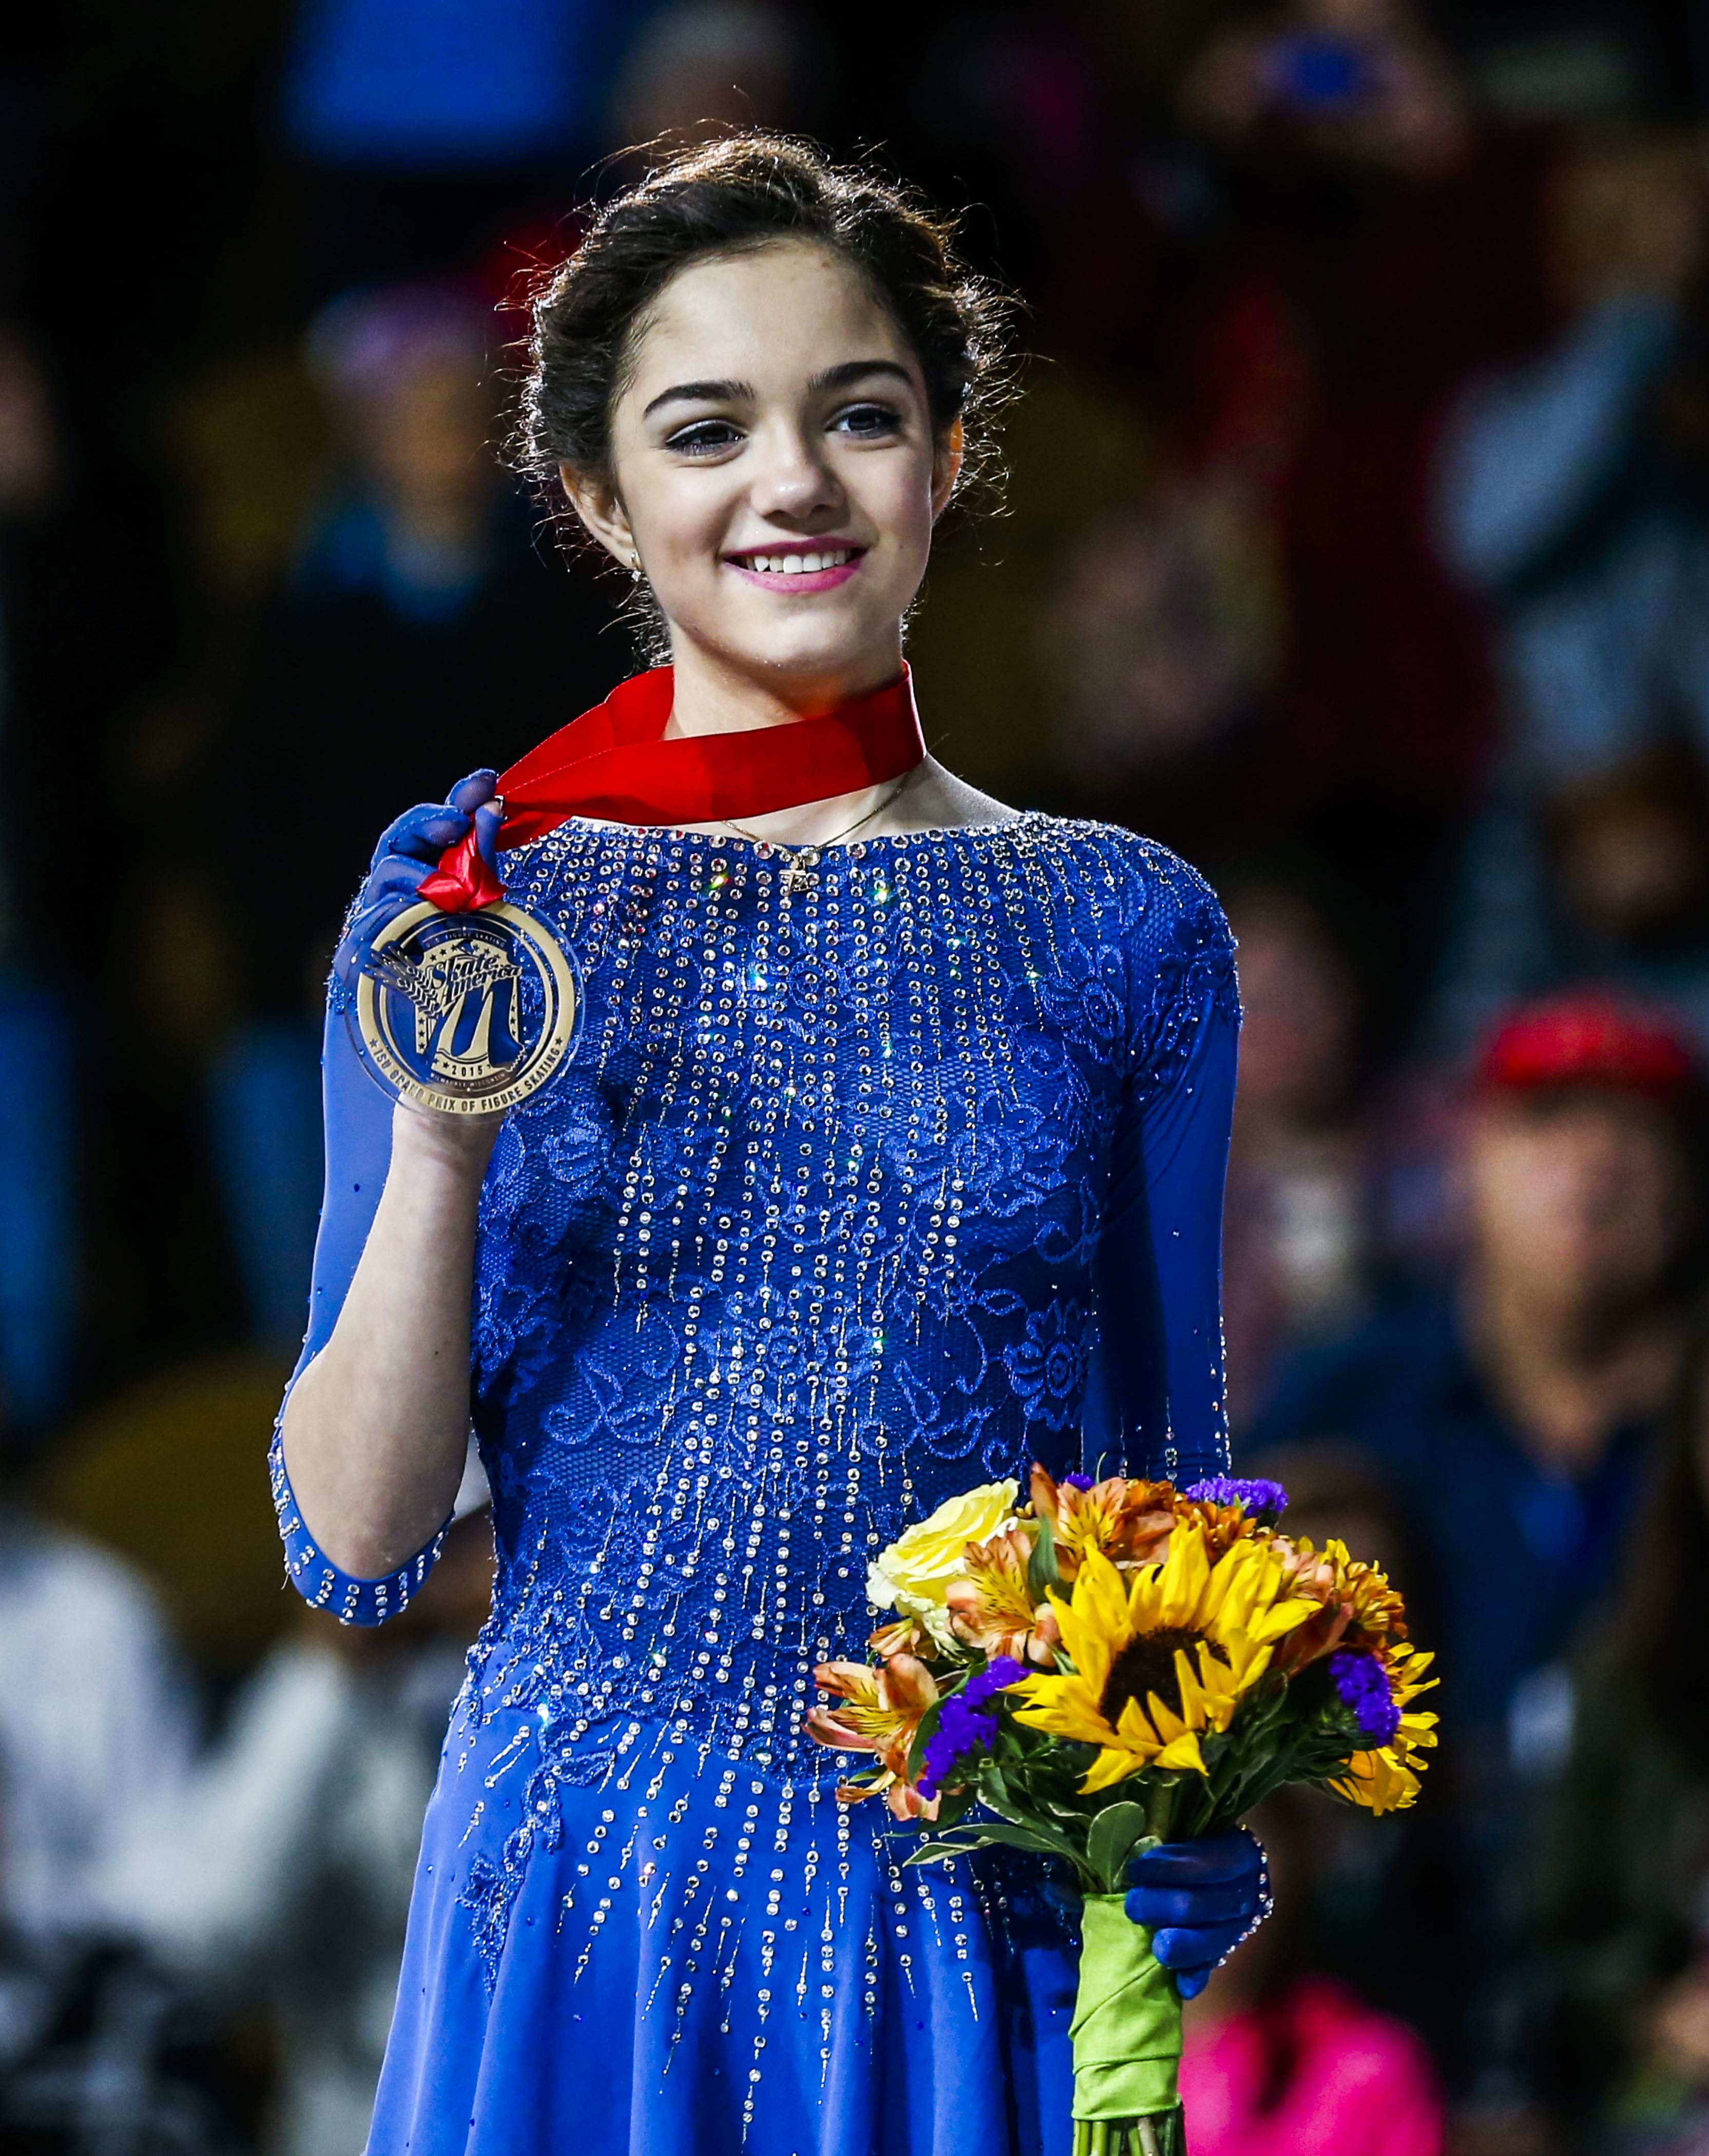 Evgenia Medvedeva of Russia poses with her gold medal in the ladiesfree skating program during the Ladies medal ceremony at the 2015 ISUProgressive Skate America Grand Prix at the UMW Panther Arena inMilwaukee, Wisconsin, USA.